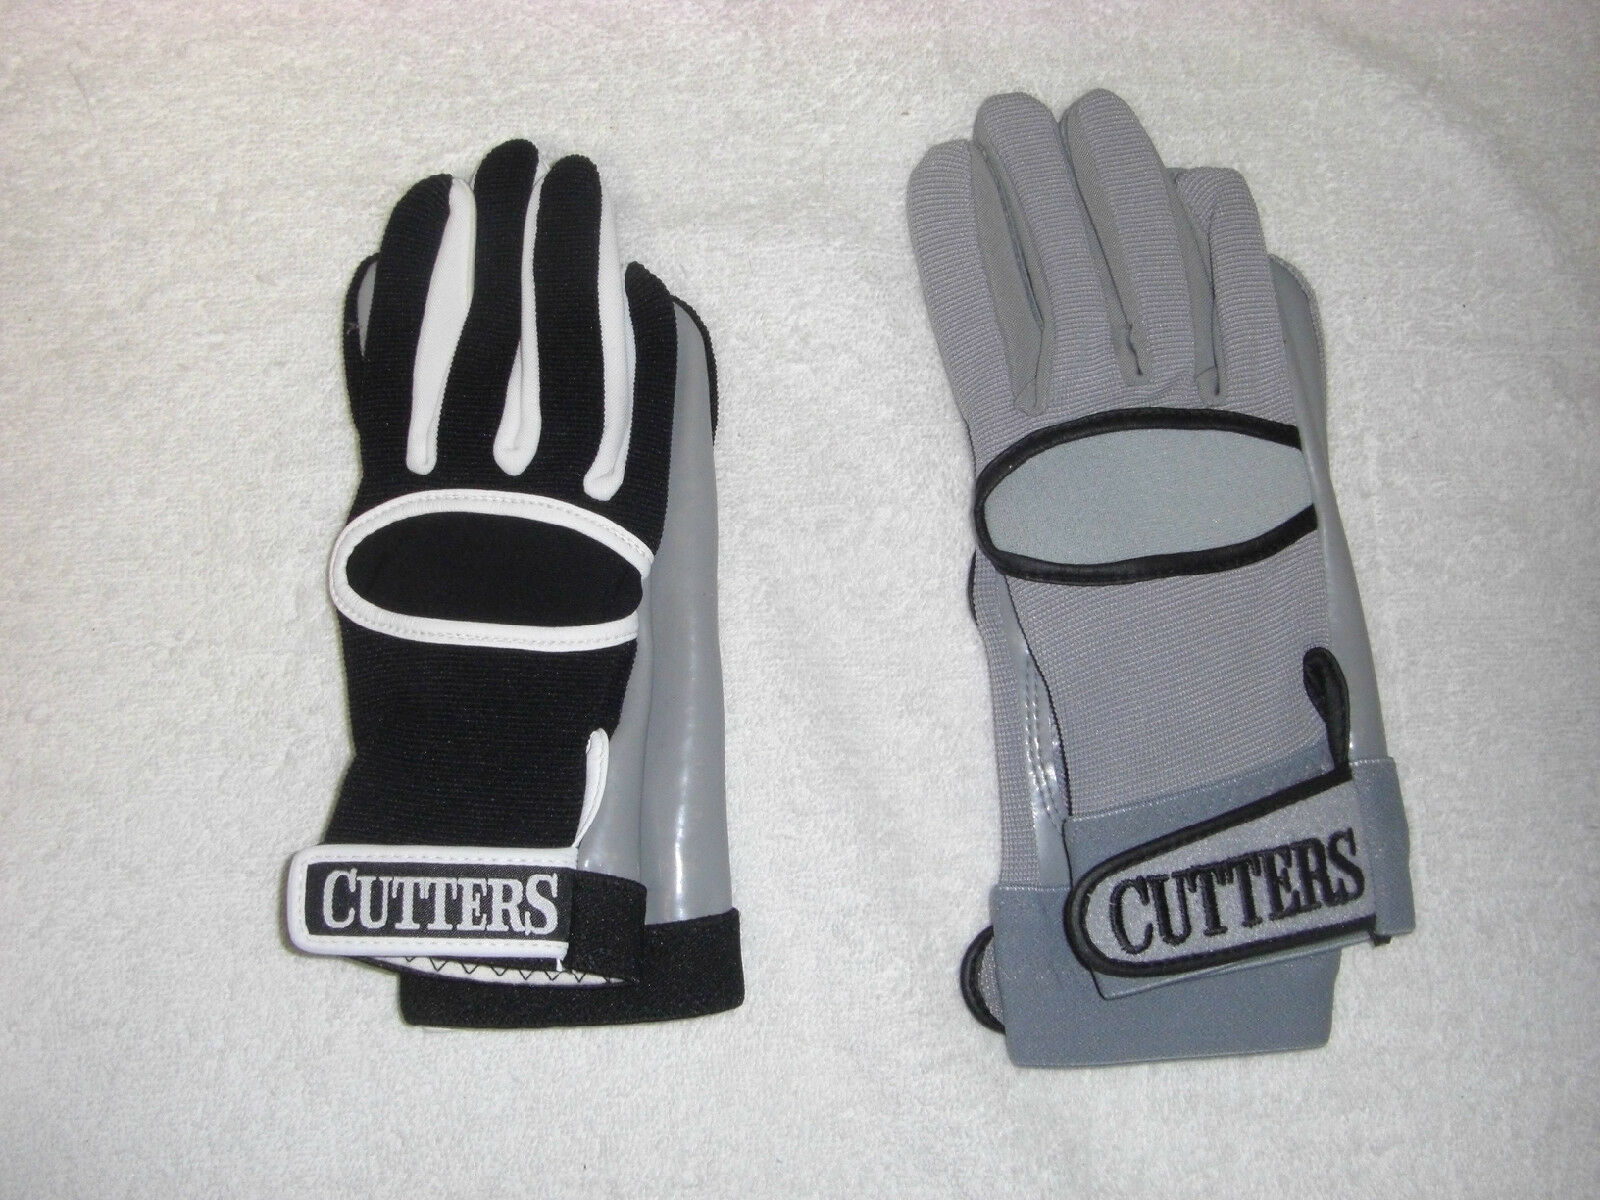 CUTTERS 017 YOUTH/ADULT OLD STYLE ORIGINAL RECEIVER GLOVE - ONE PAIR